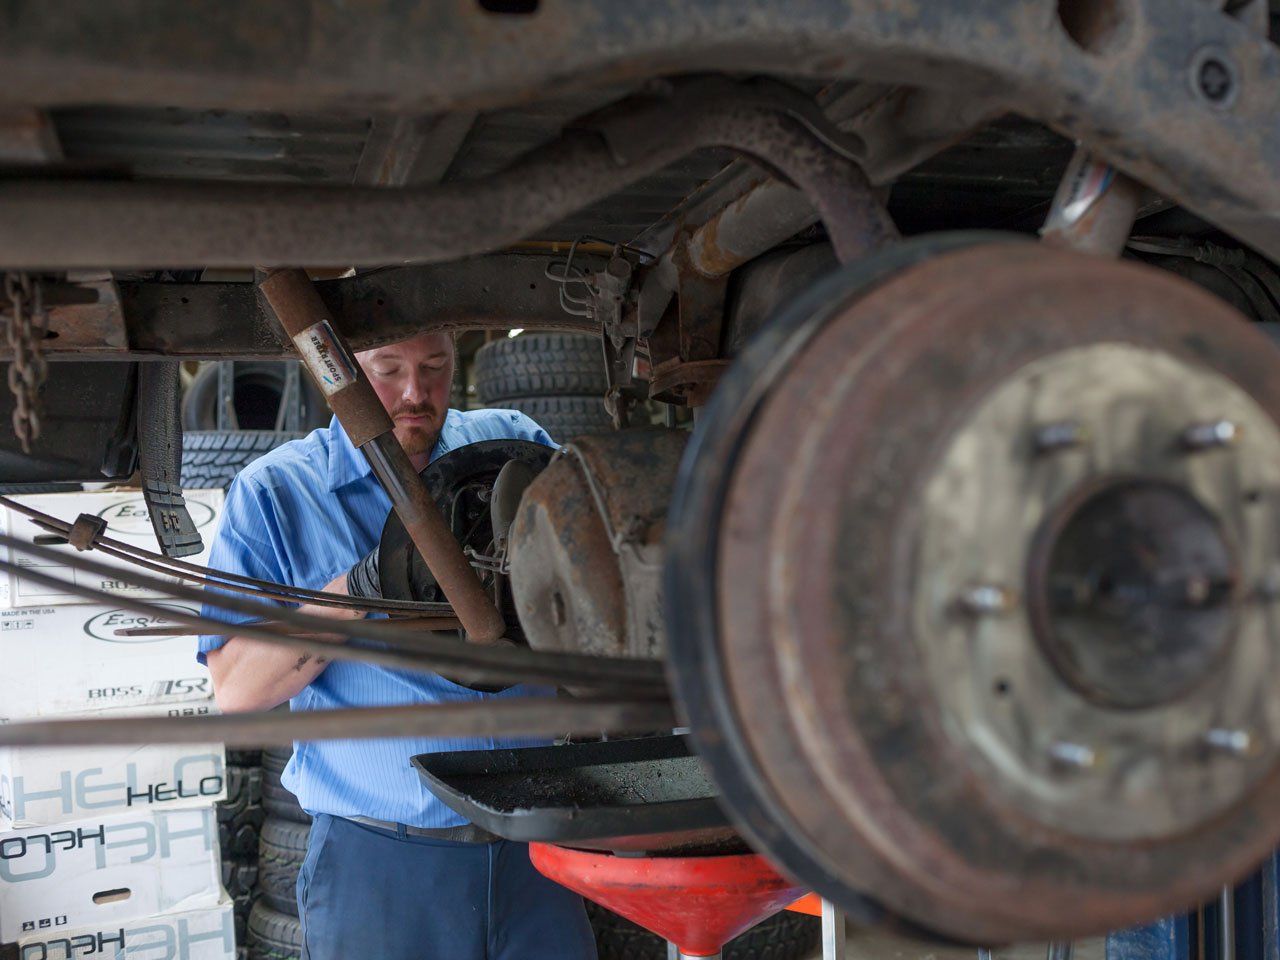 Close up of an automotive technician working on axels of a raised vehicle with wheels removed